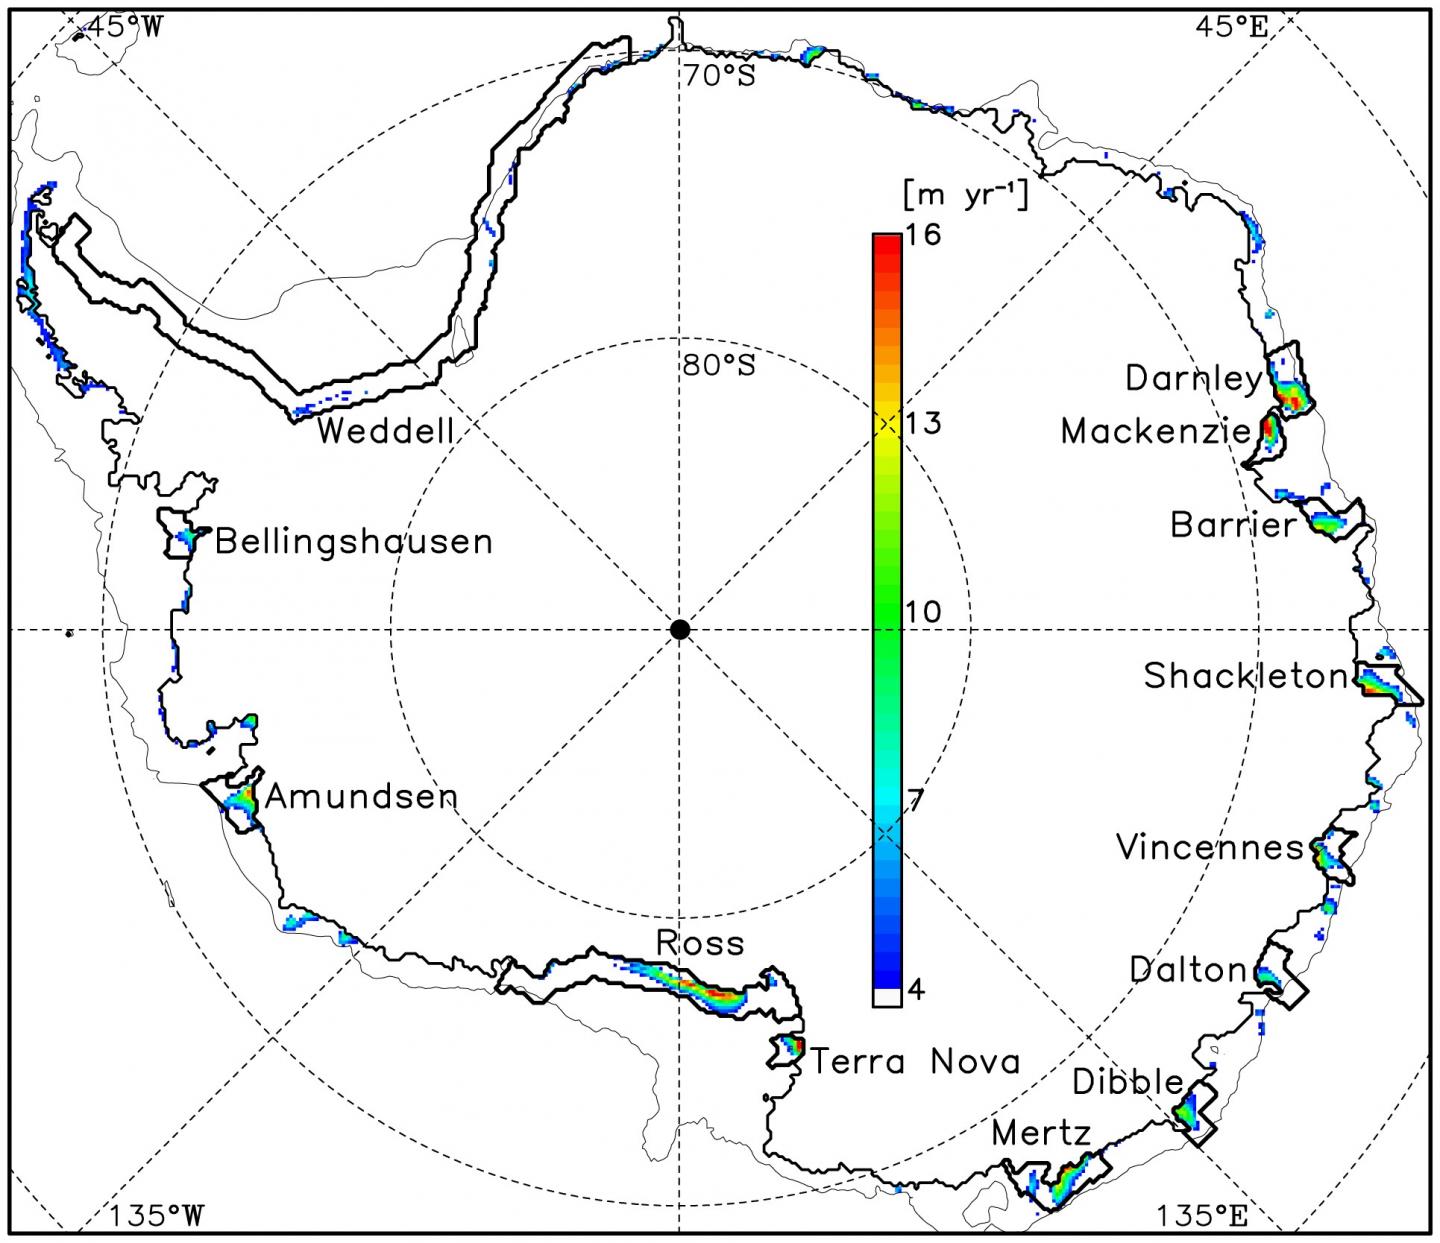 Figure 2: Mapping of Antarctic Sea Ice Production